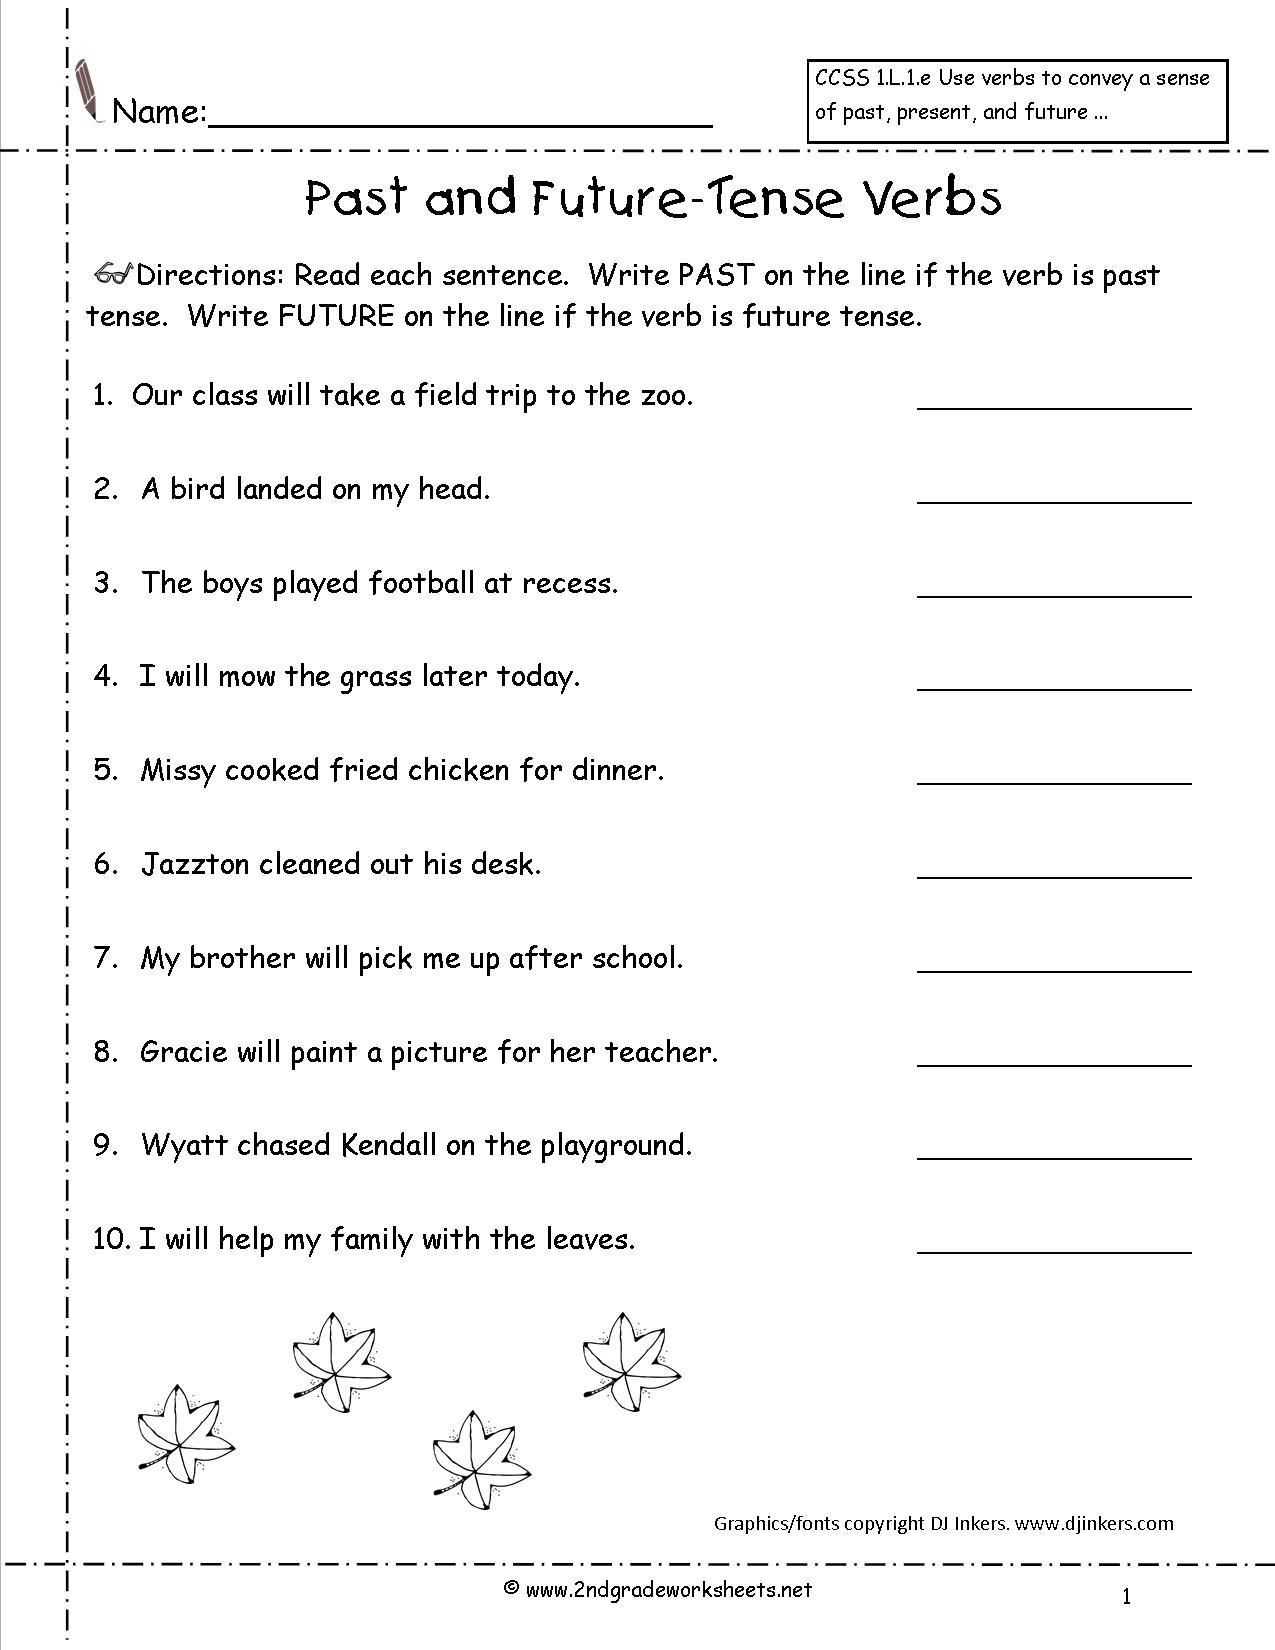 Dilations Worksheet Answers as Well as Past Present and Future Tense Verbs Worksheets for 2nd Grade the